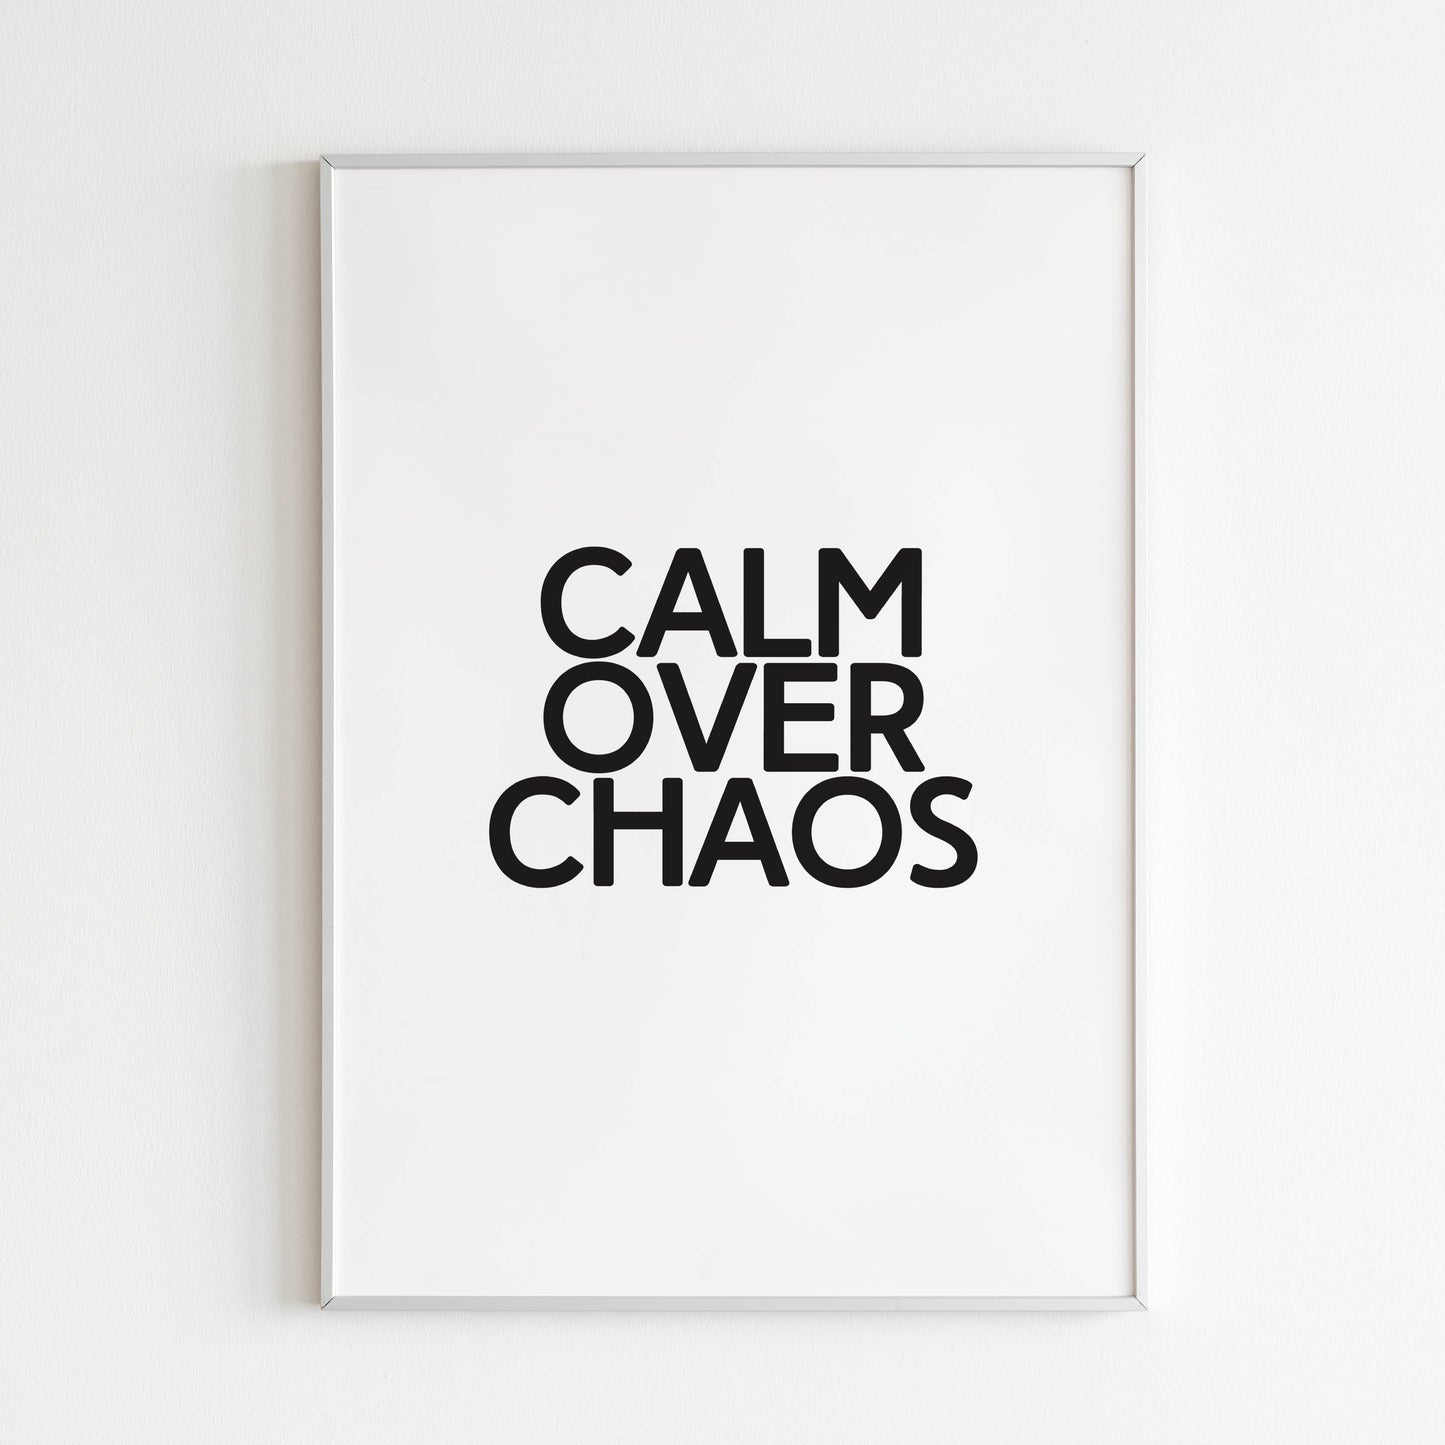 Downloadable "Calm over chaos" art print, inspire relaxation and mindfulness amidst life's challenges.